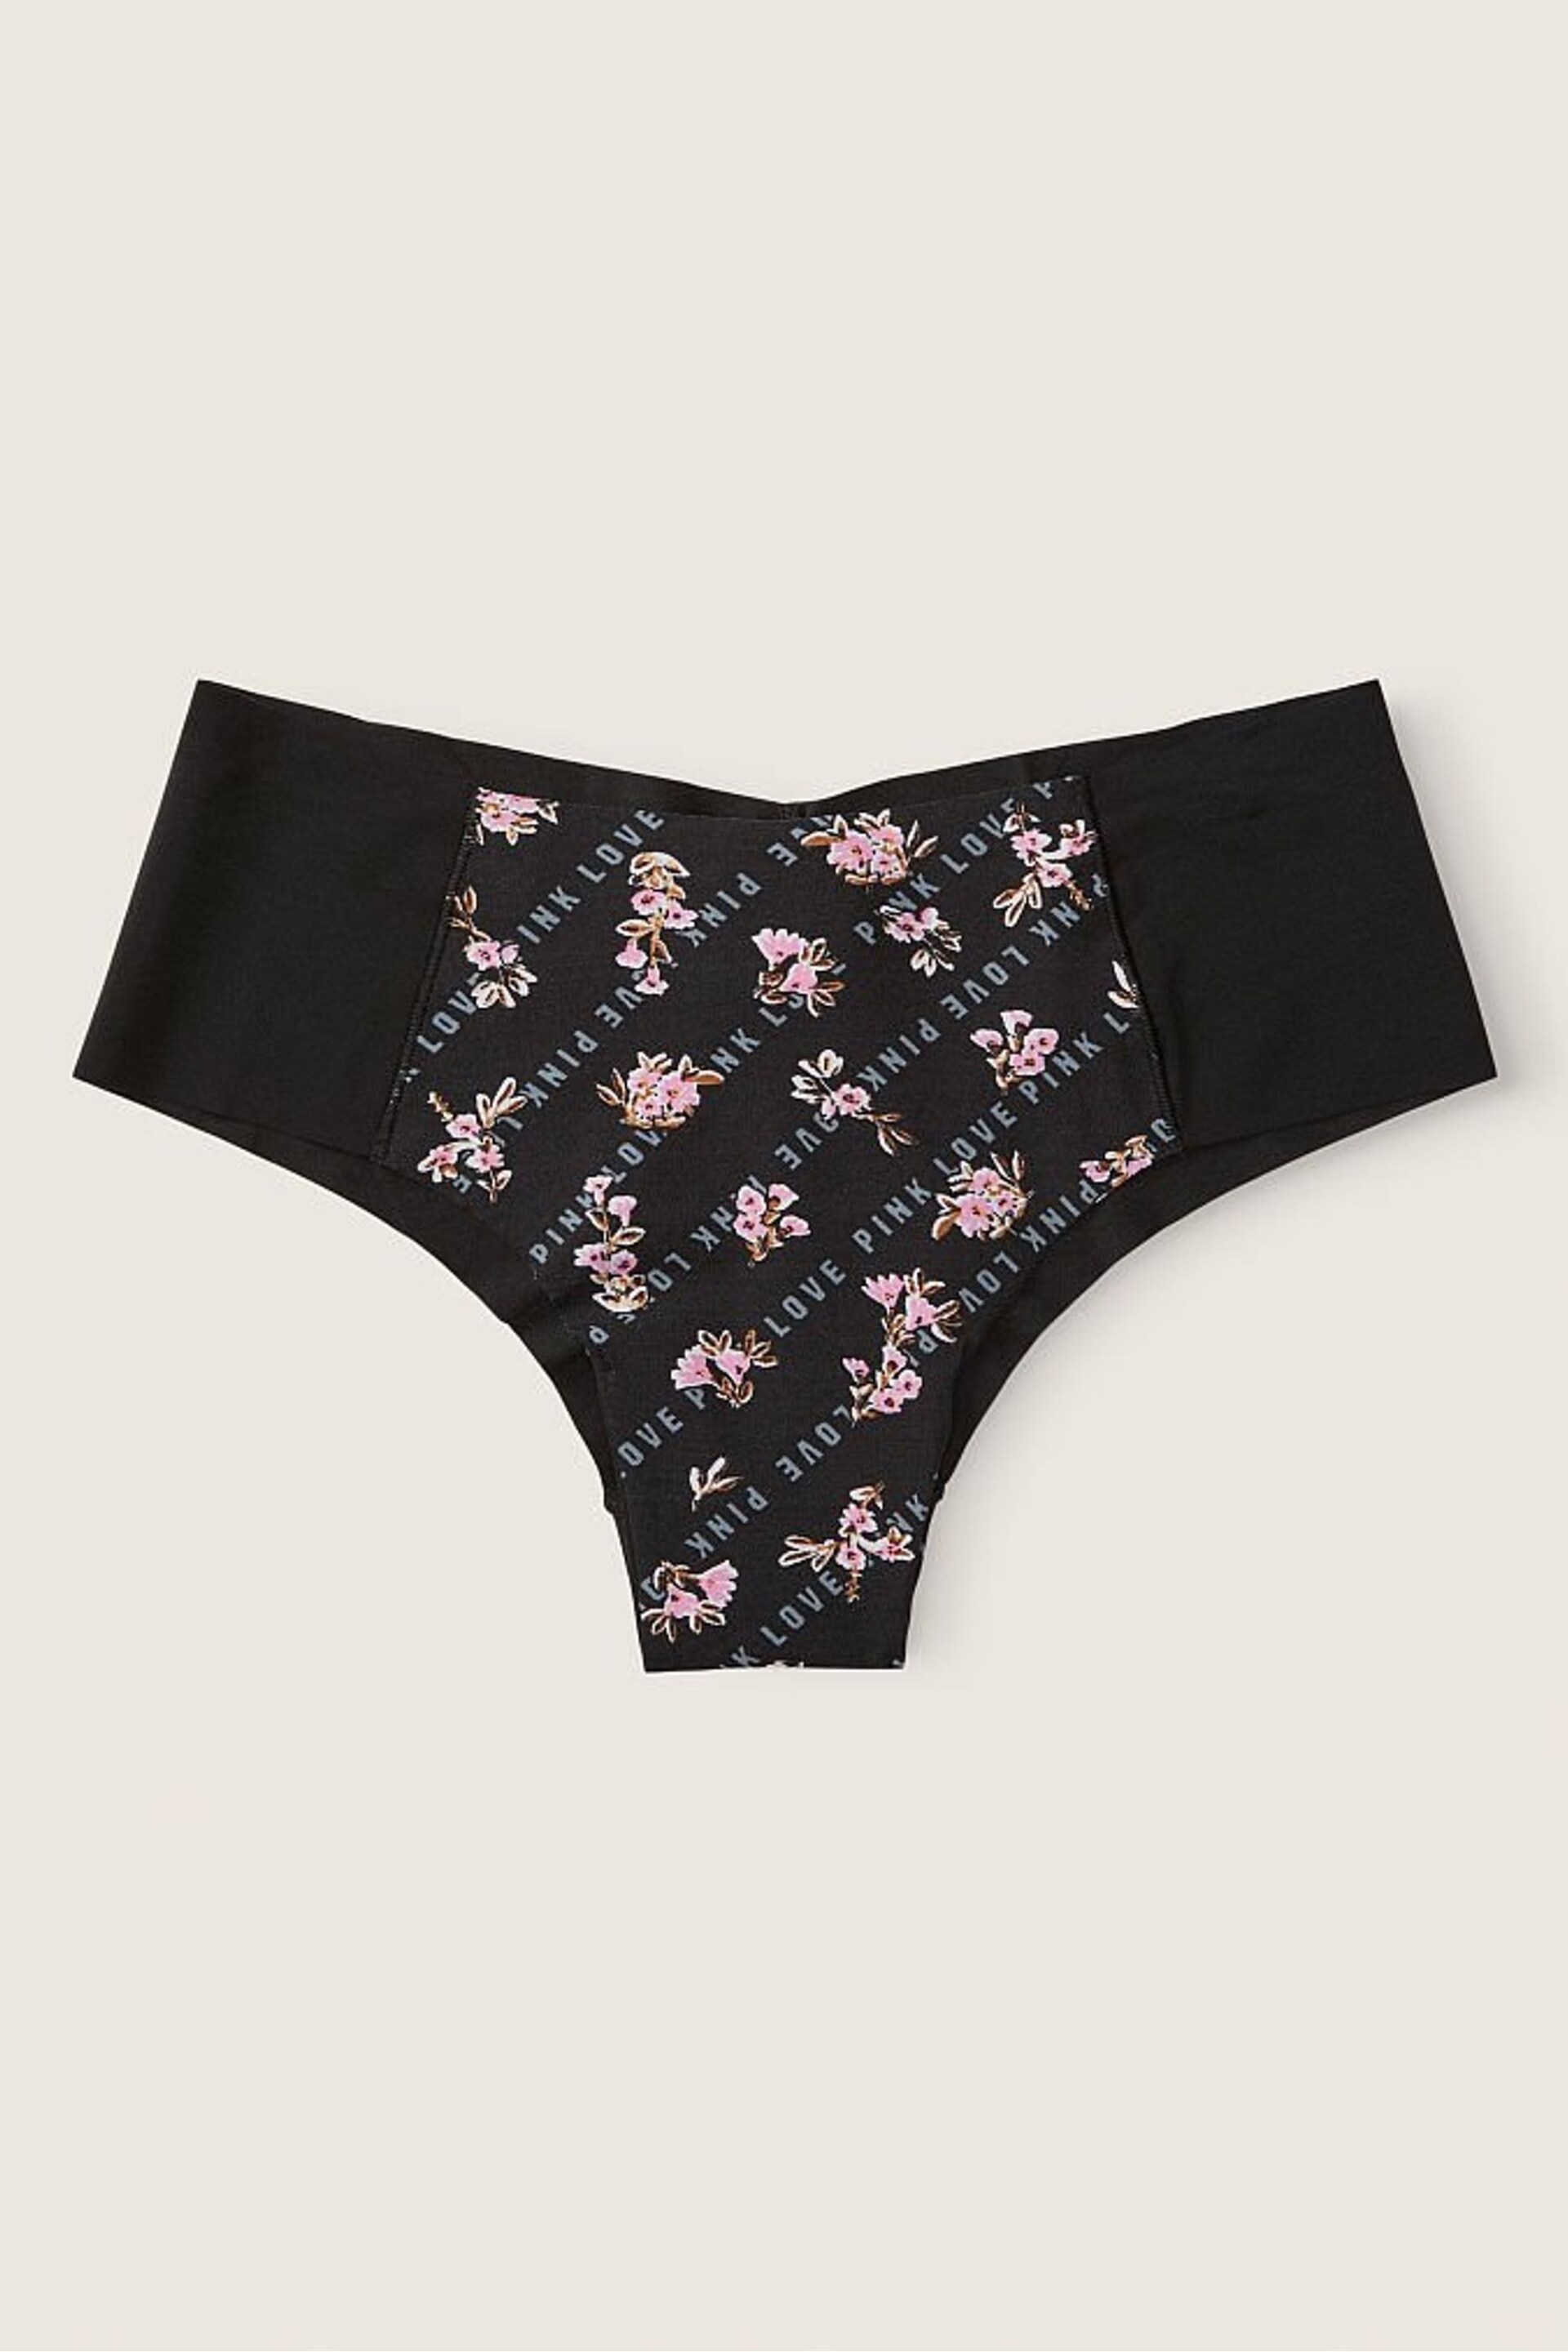 Victoria's Secret PINK Logo Floral Pure Black No Show Cheeky Knickers - Image 2 of 2